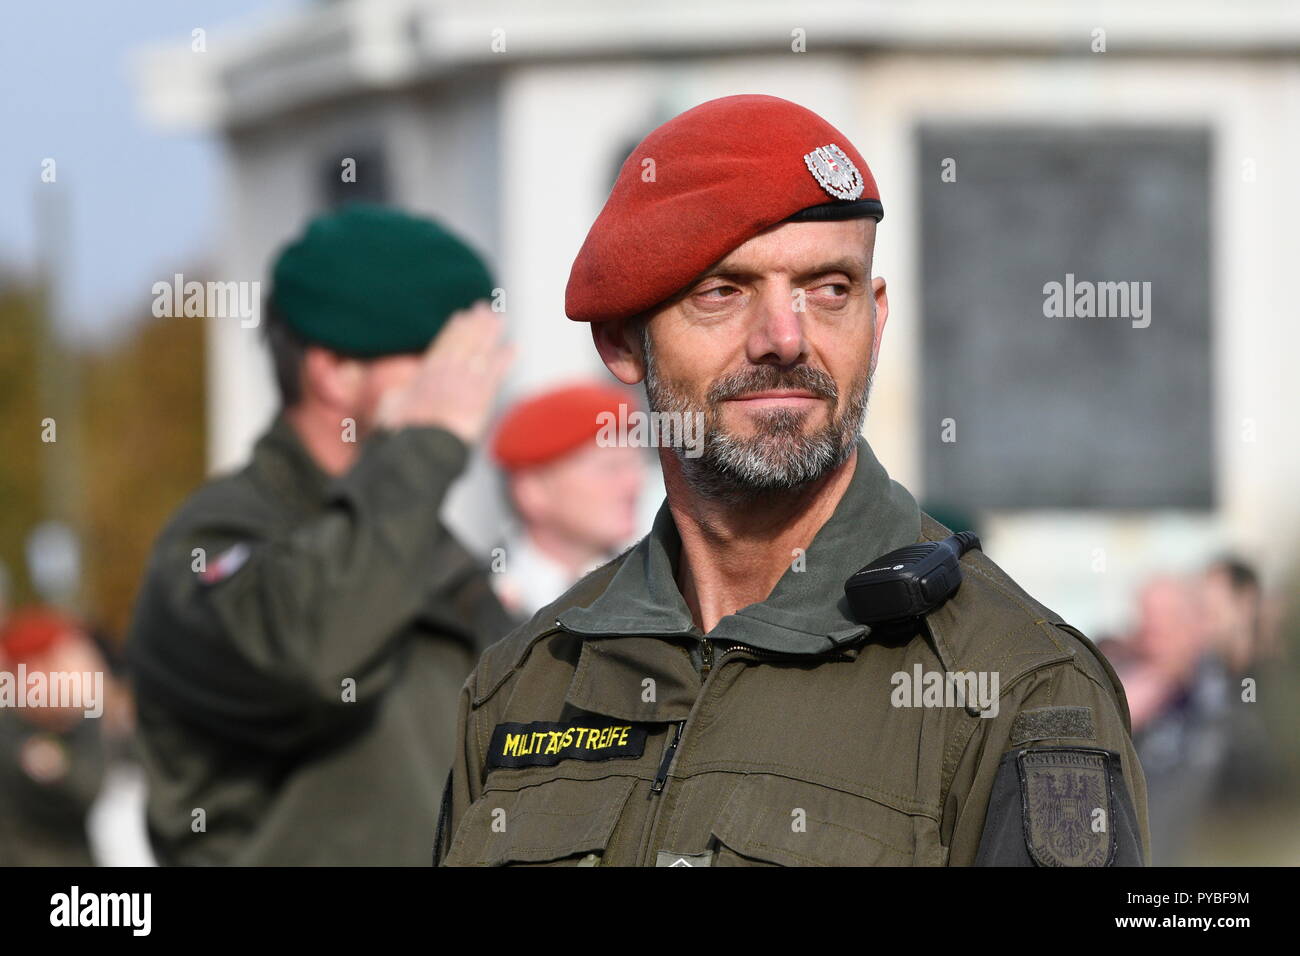 Vienna, Austria. 26 October 2018. Performance show of the Austrian Armed Forces on the national holiday in Vienna at the Heroes Square. Credit: Franz Perc/Alamy Live News Stock Photo